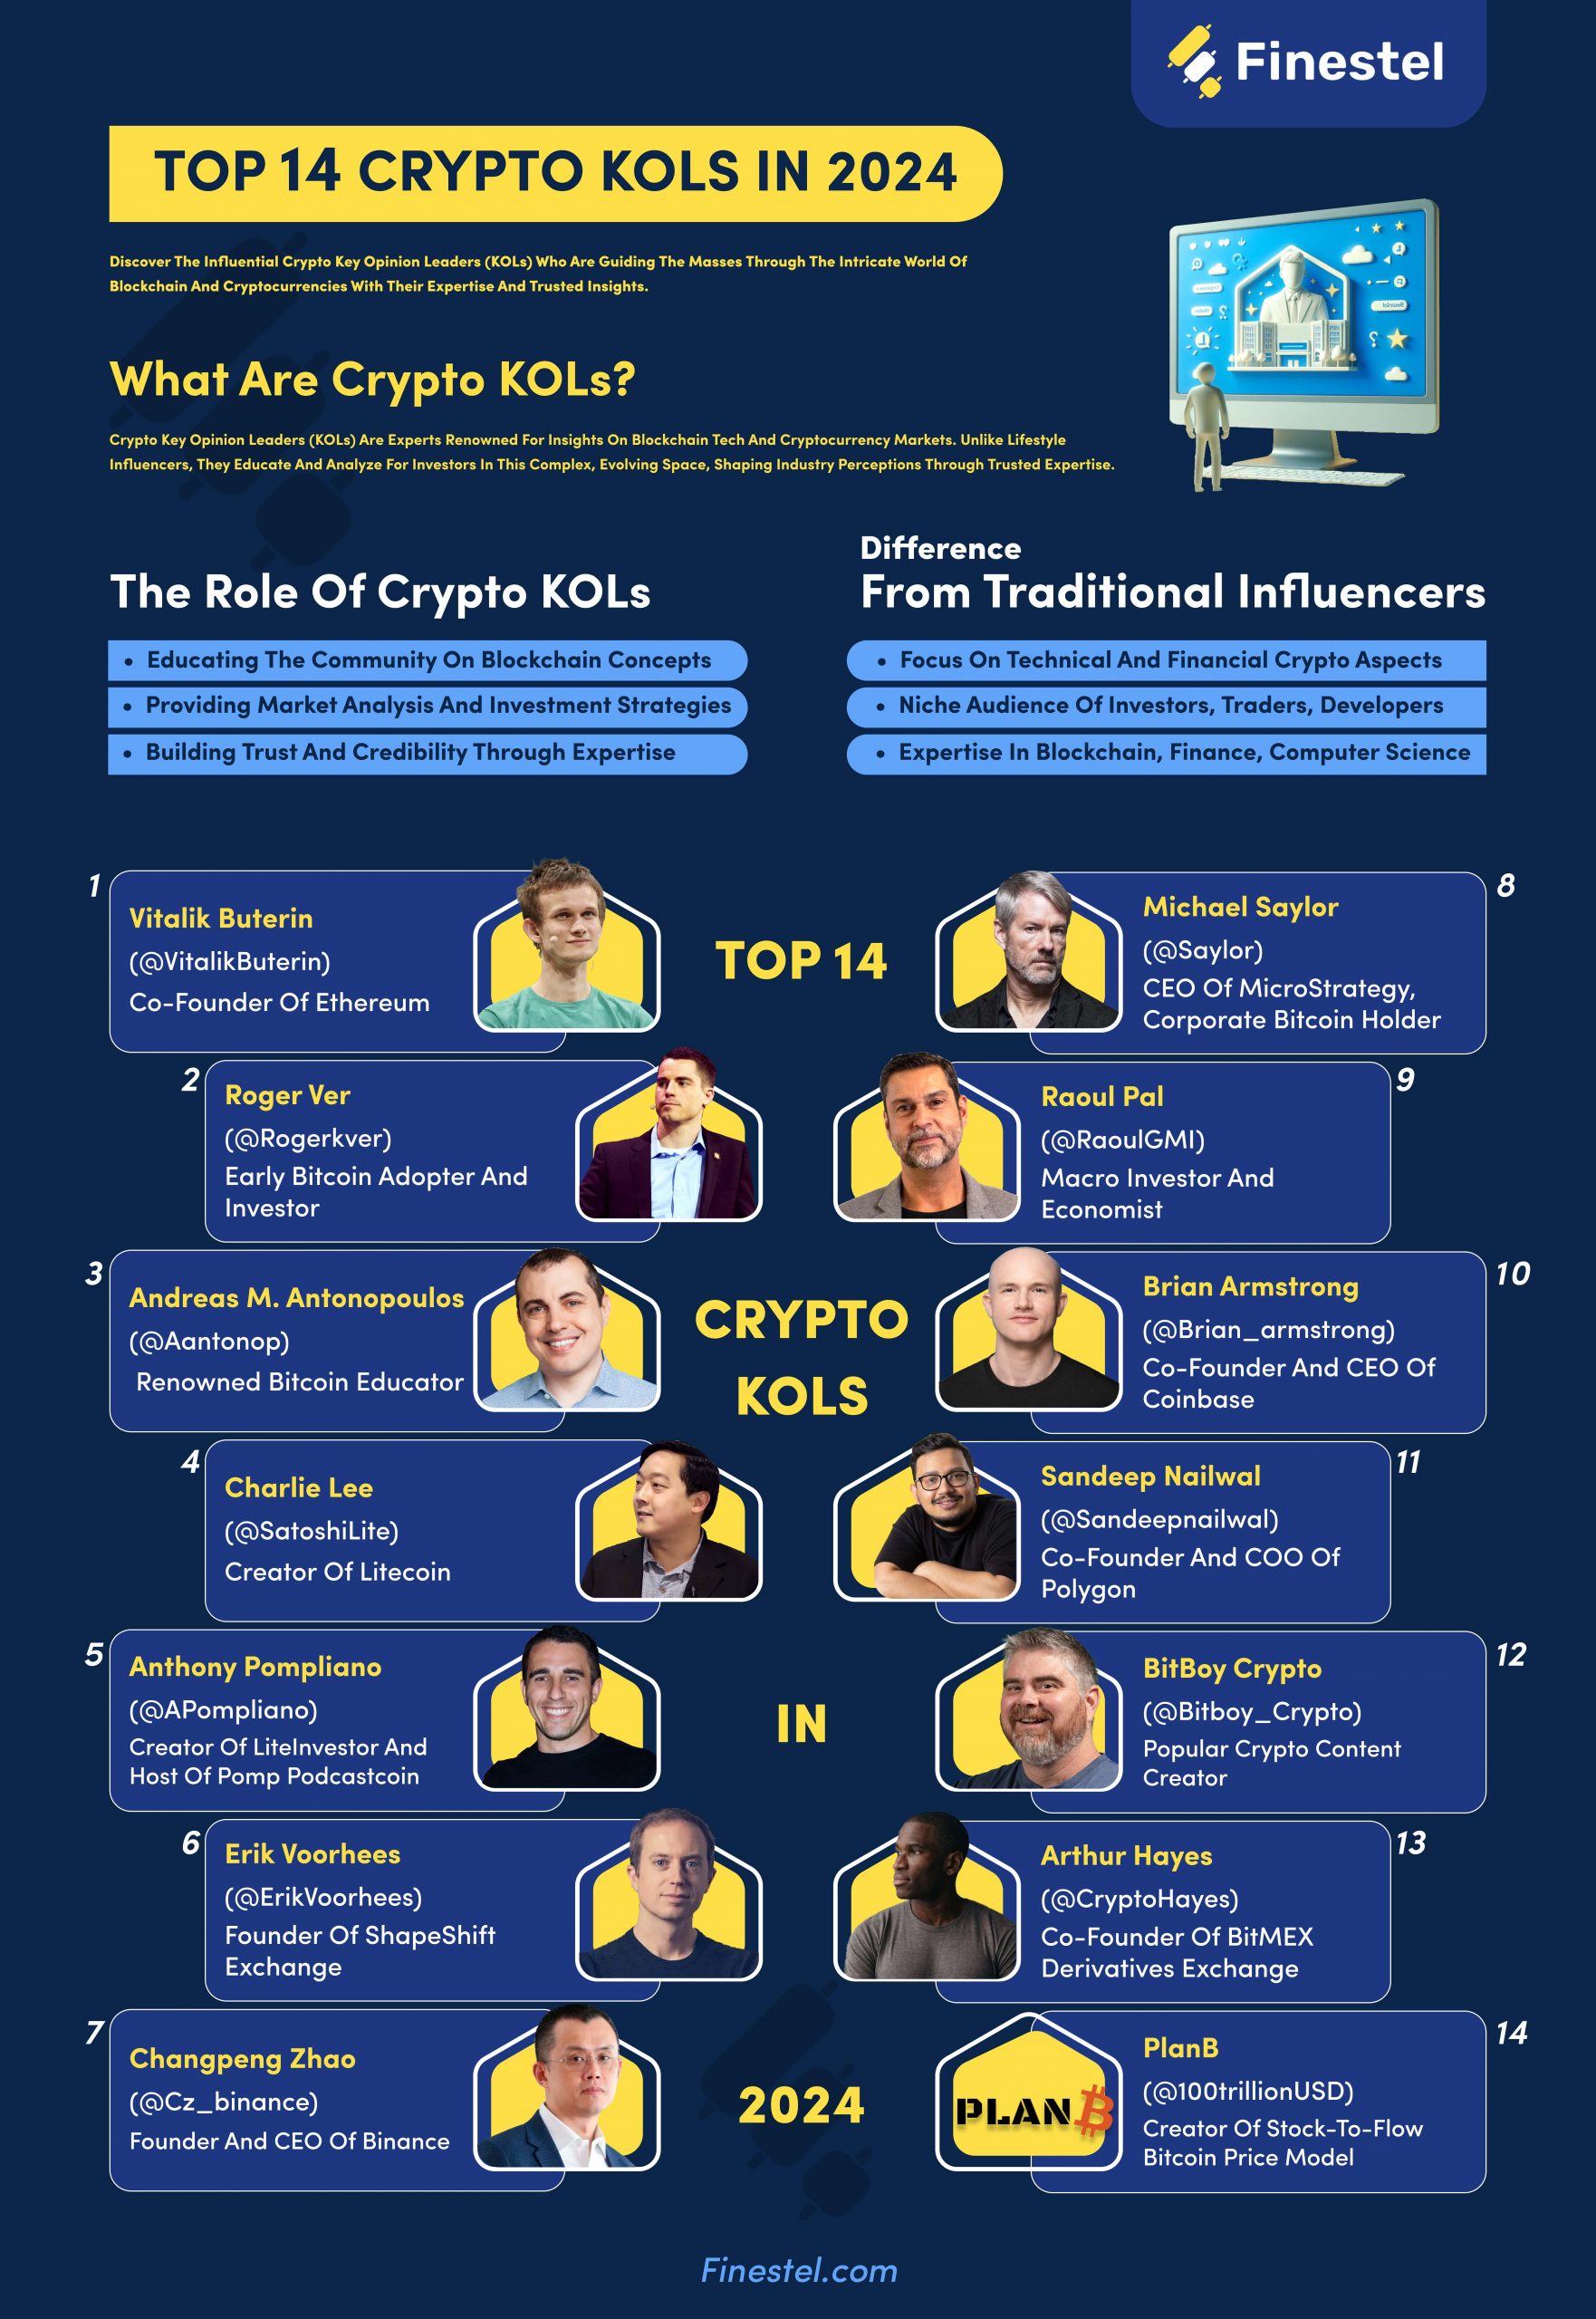 The Best Crypto KOLs in 2024 Infographic